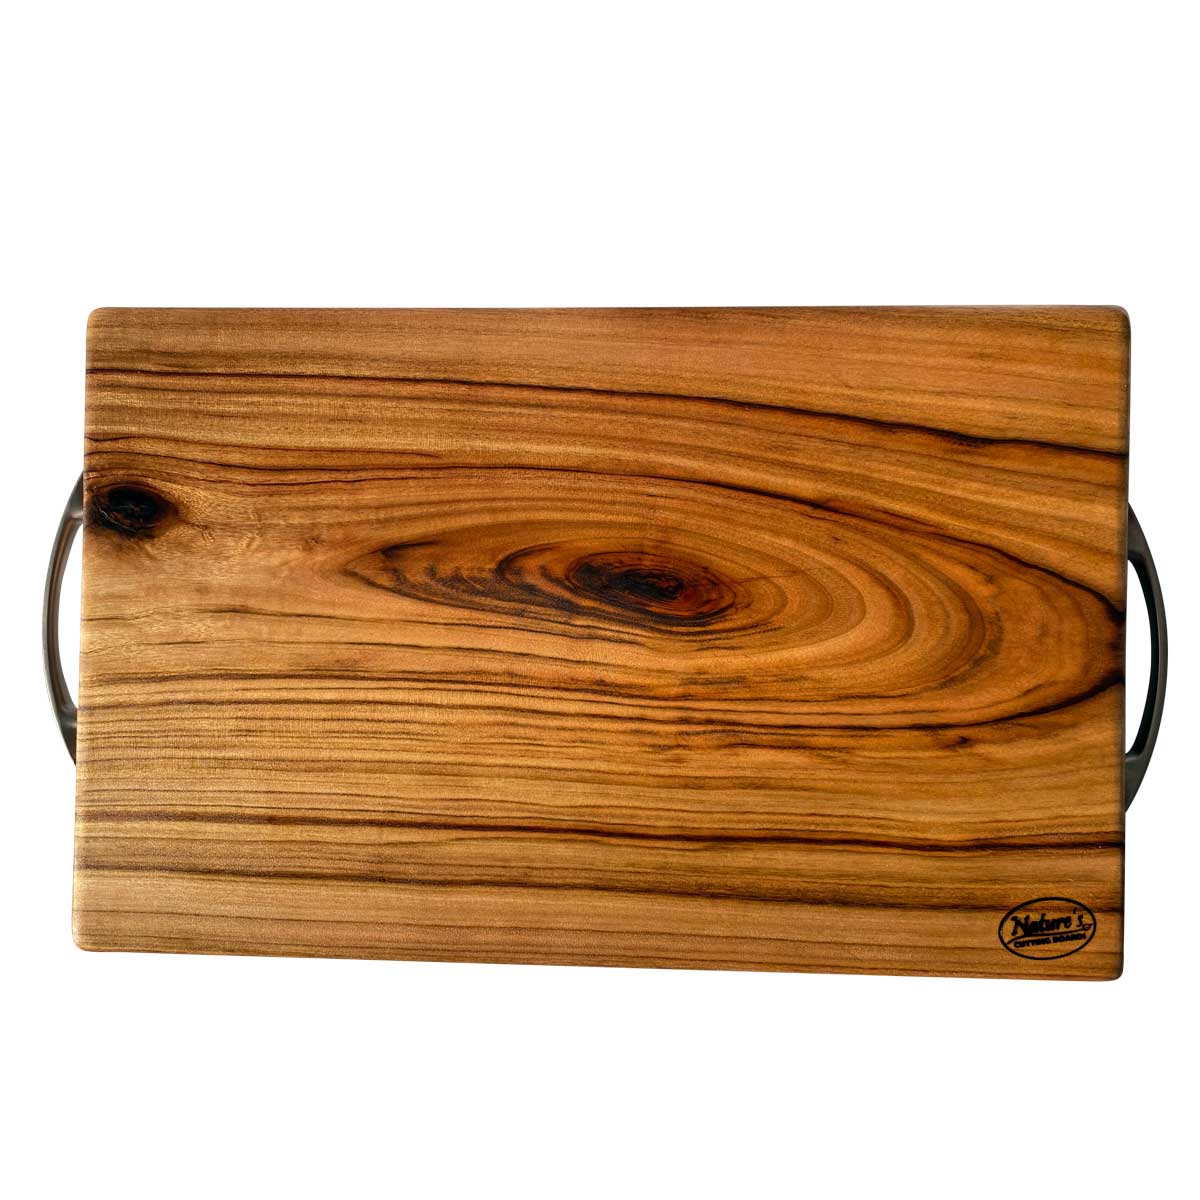 Nature's Boards large carving board's flat side opposite the deep groove or juice rail and stainless steel handles handmade from camphor laurel timber.